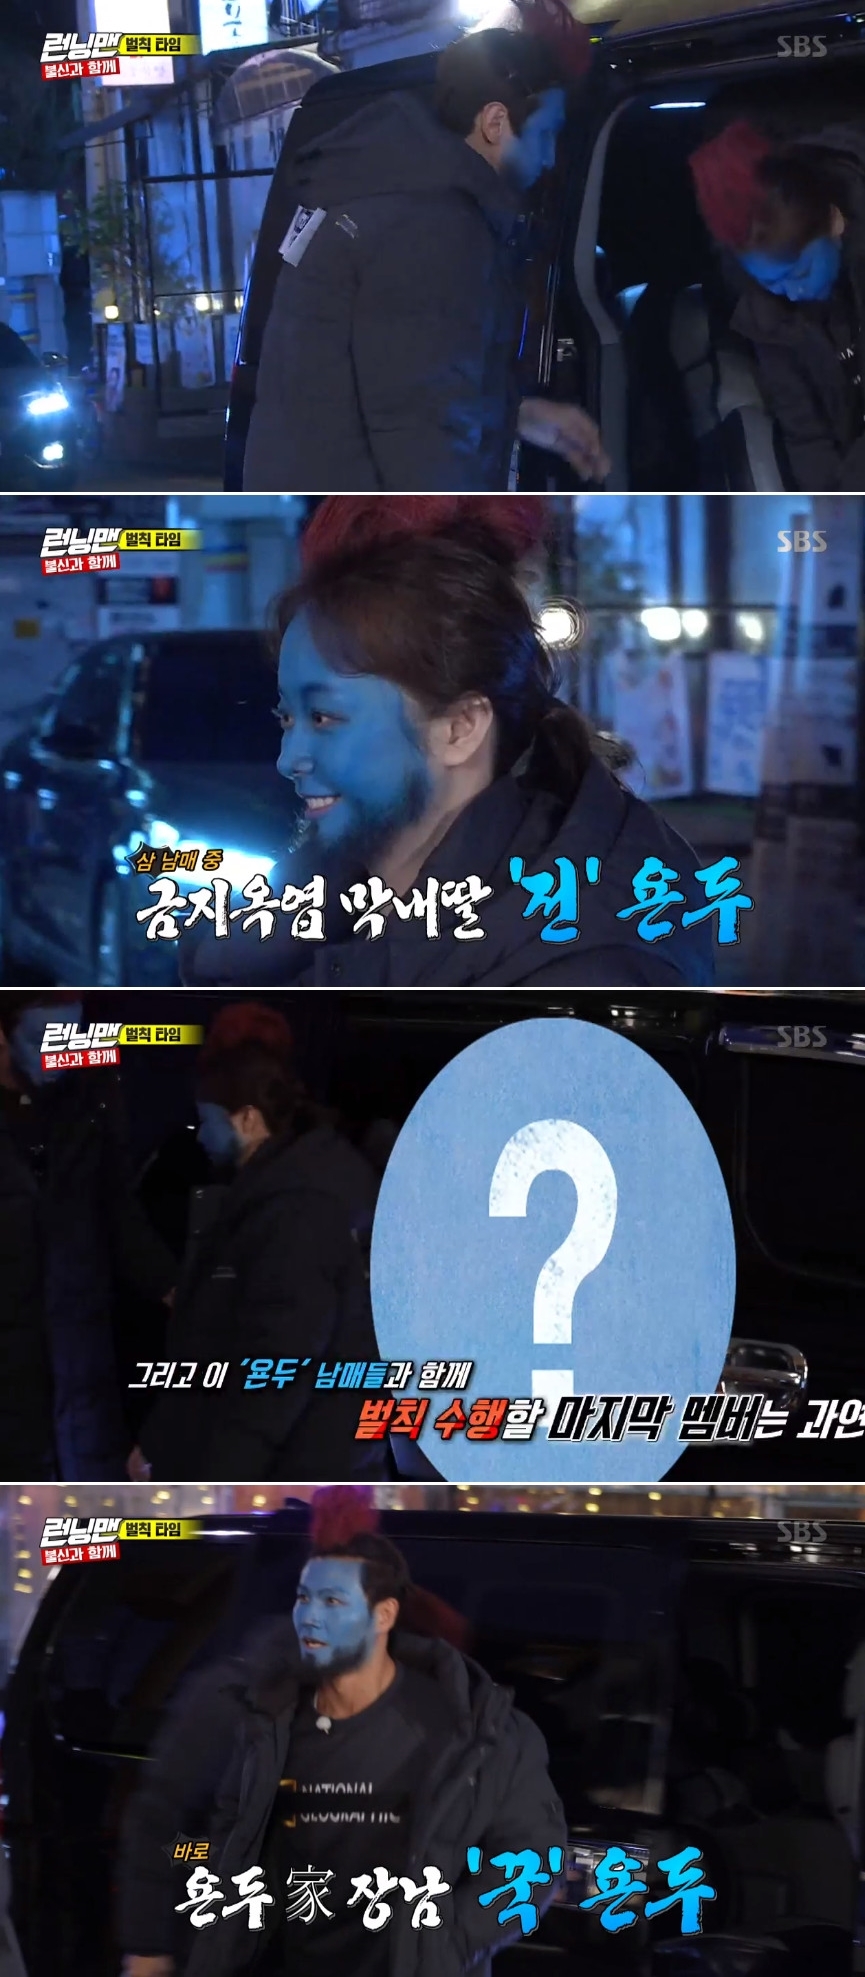 Seoul = = Lee Kwang-soo, Jeon So-min and Kim Jong-kook presented Bungeo-pang with a yondou make up as a penalty.In the SBS entertainment program Running Man broadcasted on the afternoon of the afternoon, four group missions were conducted and the Running Man race was held in the order of less penalties in case of failure.In the opening day, Ji Suk-jin pointed to Yoo Jae-Suk (Yu San-sul), who turned into a trot singer, saying, Did you see the morning yard?Yoo Jae-Suk said, Seok Jin-hyung looked at me and said, My stomach hurts. Kim Jong-kook, who was next to him, said, There are many people who envy Seokjin Lee.I live like a bachelor, said Yoo Jae-Suk, who added, My brother-in-law lives like a solo.The game is in full swing: The final penalty in case of a failure of the mission requires 100 Winter snack Bungeo-pangs to be sold after Yondu make up.The final Alcandy wins the most members, and the winner wins the goods and penalty exemption; the members are determined to lets succeed.Each of the members went back to 10 AlCandy. Ji Suk-jin put one in his mouth as soon as he received the AlCandy.When the members were surprised, they said, I can ask the production team. But they did not give more, so Ji Suk-jin started with nine Al Candy alone.The first winter snack was a 60cm-long, wide-bodied bungeo-pang-impeded mission that started the Queese King Shooter.As soon as the crew mentioned the mission, Haha voluntarily complained, saying, It is hard to pass with me, Yang Se-chan and Song Ji-hyo.Yoo Jae-Suk said, Song Ji-hyo is the worst of them, and Yang Se-chan laughed when he mumbled that he was a fish sister.In the first quiz, which featured red, blue and purple in English, Yang Se-chan and Song Ji-hyo laughed by writing creative words.The second mission was Bob My Way, and the members Choices each of the eight menus.If the total is less than 30,000 won, you can eat Choices menu and snacks.While there were a lot of members who Choices the 2000 won ramen noodles, Ji Suk-jin was a expensive soy sauce Choices, and the atmosphere suddenly cooled down.However, for a while, Jeon So-min choices 500 won boiled eggs, and the members ate food for less than 30,000 won.The final mission was The Guys Who Dont Cross the Line.Lee Kwang-soo, last, failed to do the mission openly when the crew said they could not challenge twice as many chances if they succeeded in the mission.Lee Kwang-soo had been troubled by the opening of the AlCandy booth and submitted one more, which eventually exceeded the scope of the presentation, which dissipated AlCandy.AlCandy ranked first, with Yang Se-chan, out of the penalty; Jeon So-min was seventh and Lee Kwang-soo was last.Together, the two identified Kim Jong-kook as the person to be penalized; the three carried out penalties to distribute Bungeo-pang to citizens after turning into Yondu.